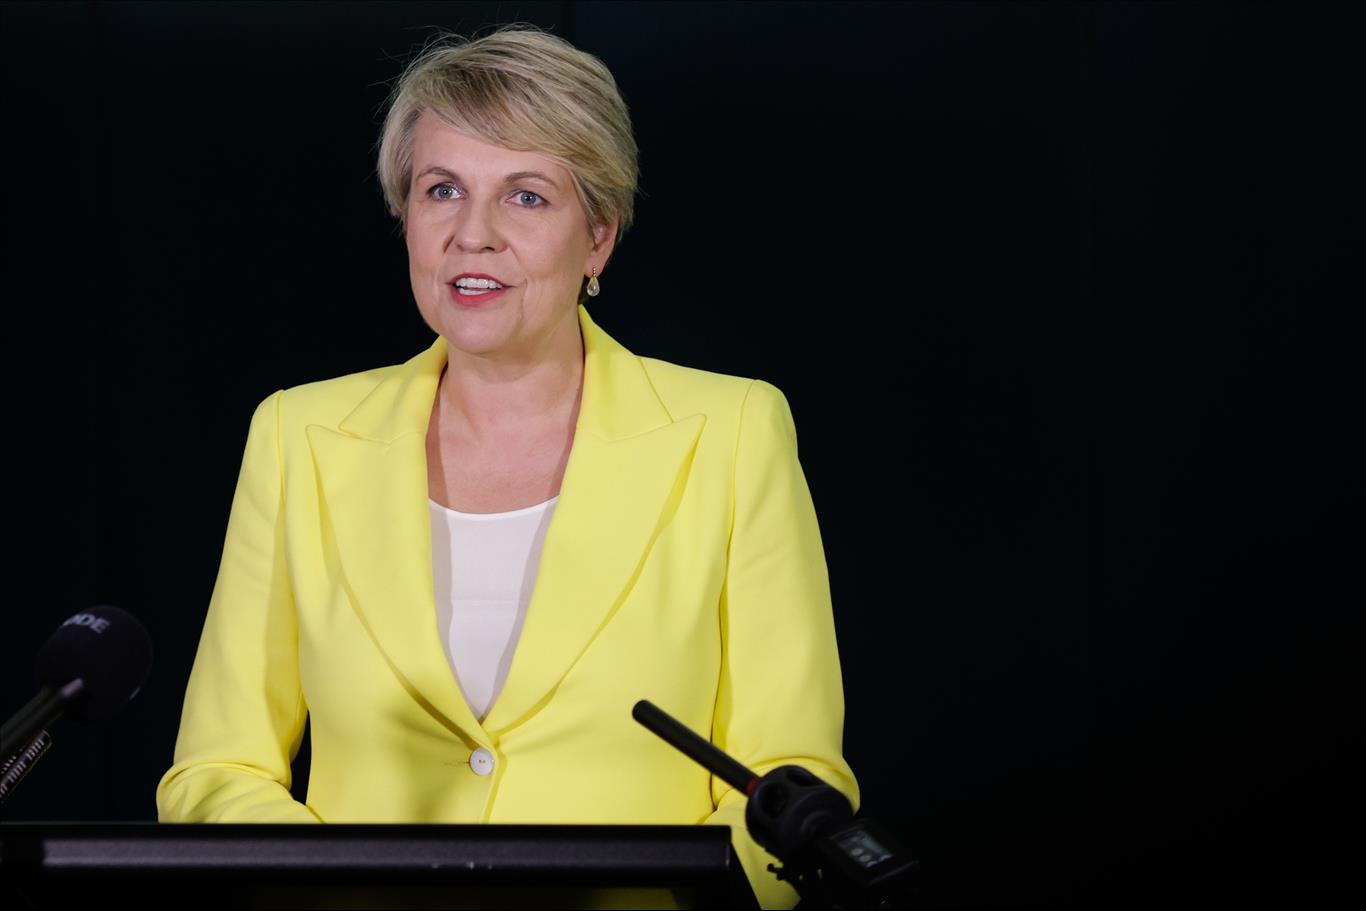 'A Policy Aesthete': A New Biography Of Tanya Plibersek Shows How Governments Work  And Affect People's Lives